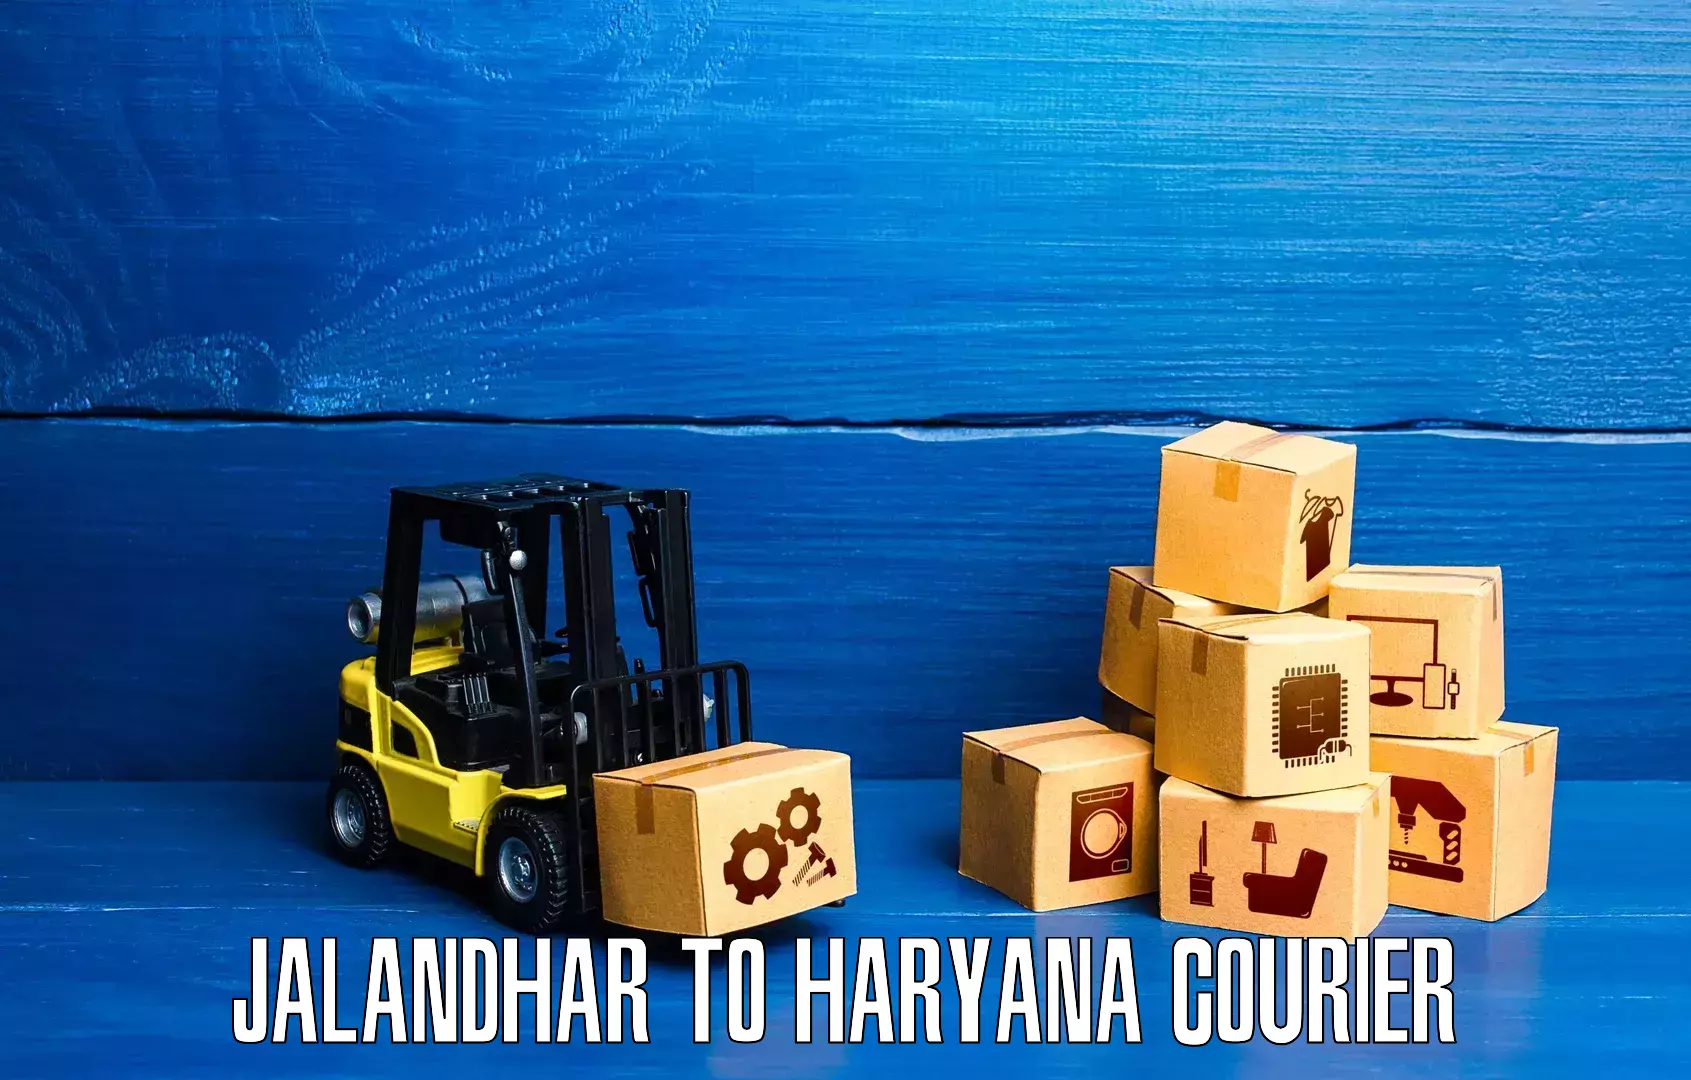 24-hour delivery options Jalandhar to Sonipat